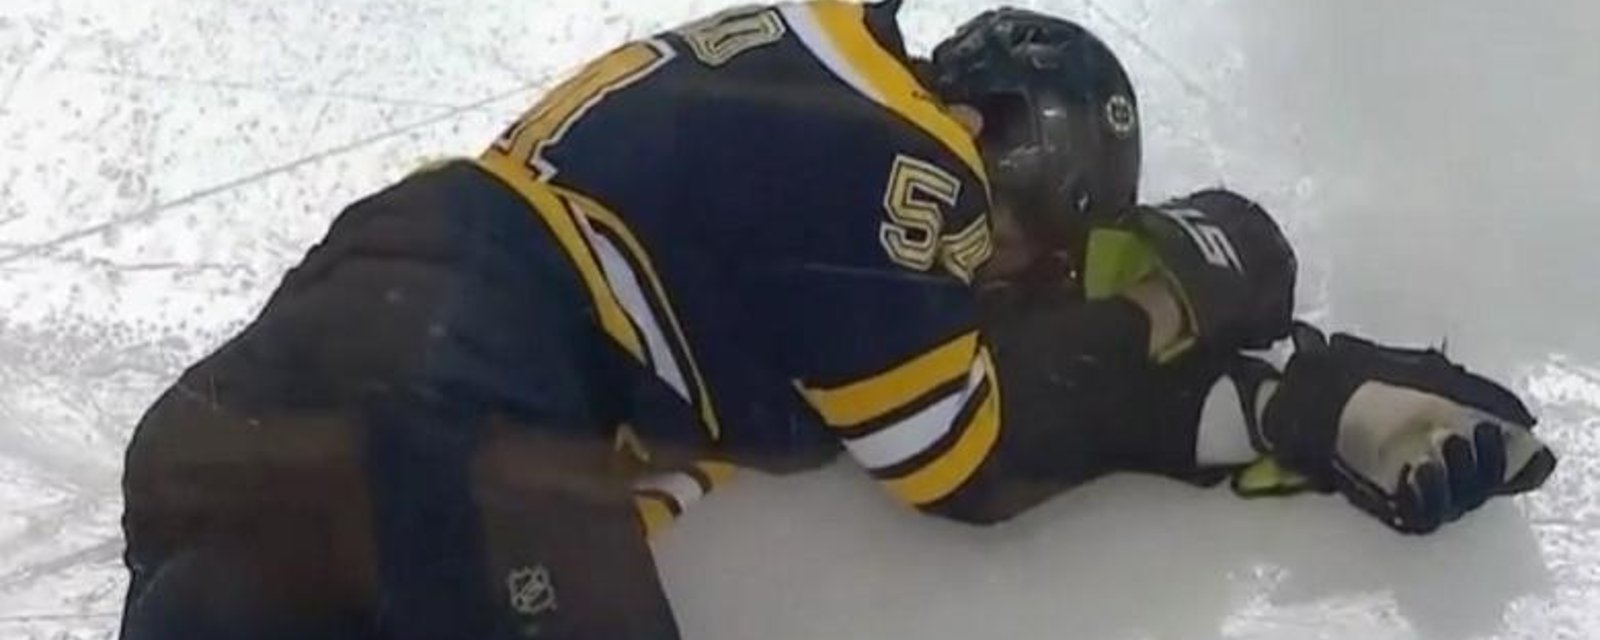 Adam McQuaid knocked out after bad hit from behind. No call.